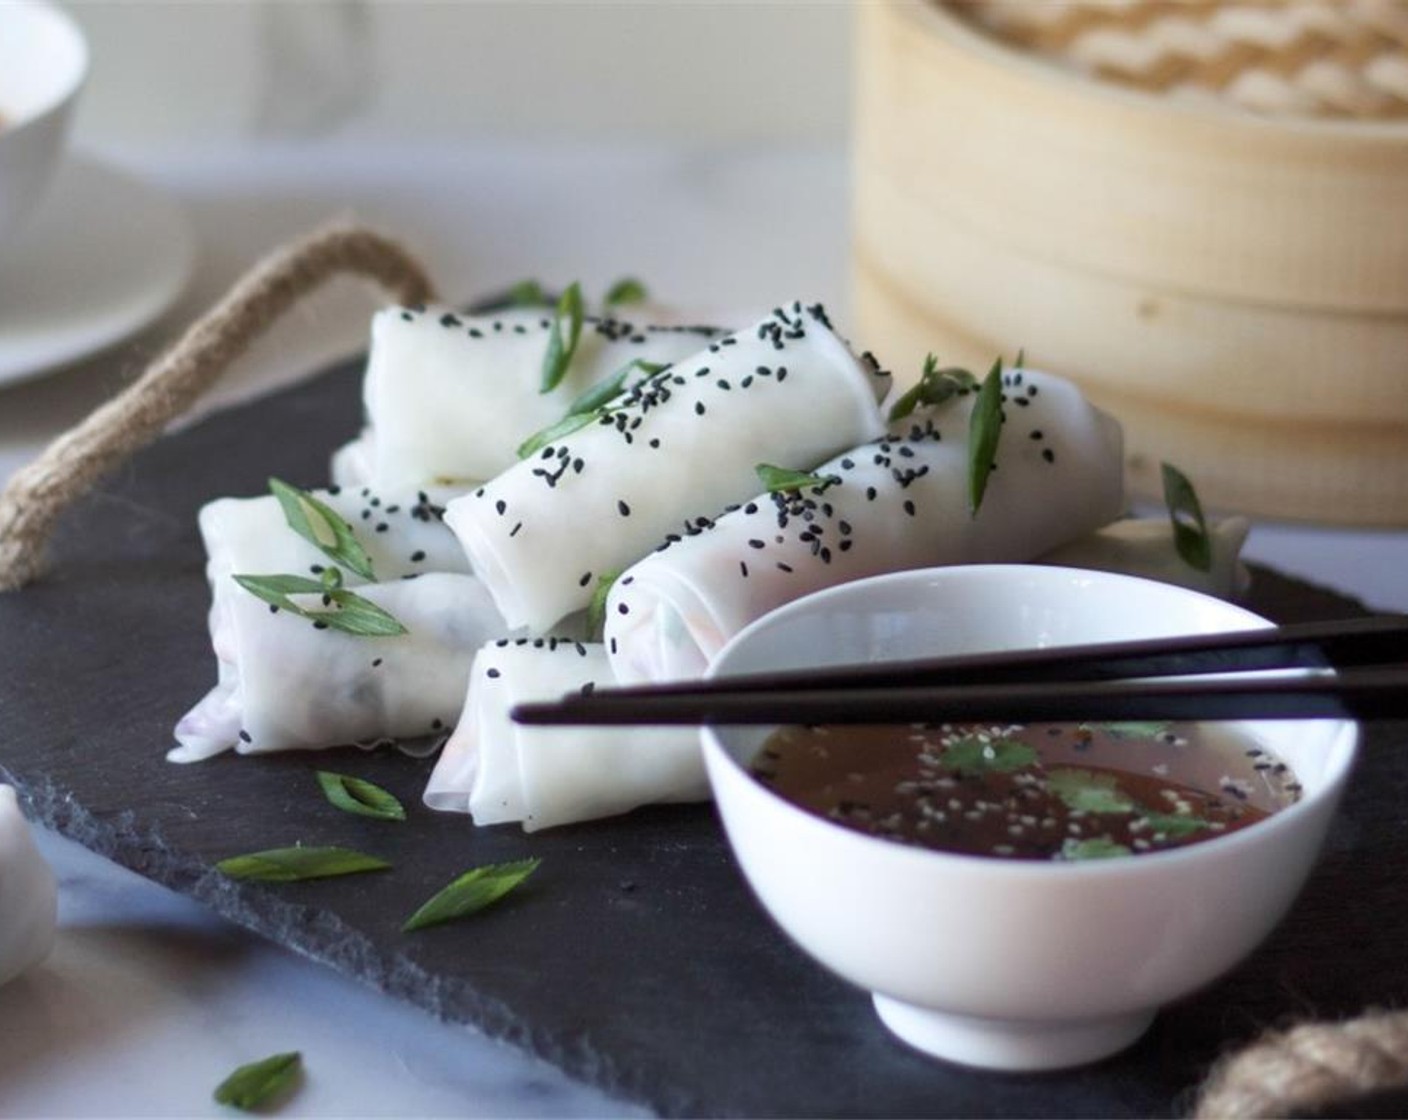 step 8 When ready to serve, sprinkle the spring rolls with a scattering of toasted Black and White Sesame Seeds (2 Tbsp), Scallions (to taste) and dunk into the ice-cold dipping sauce. Enjoy!